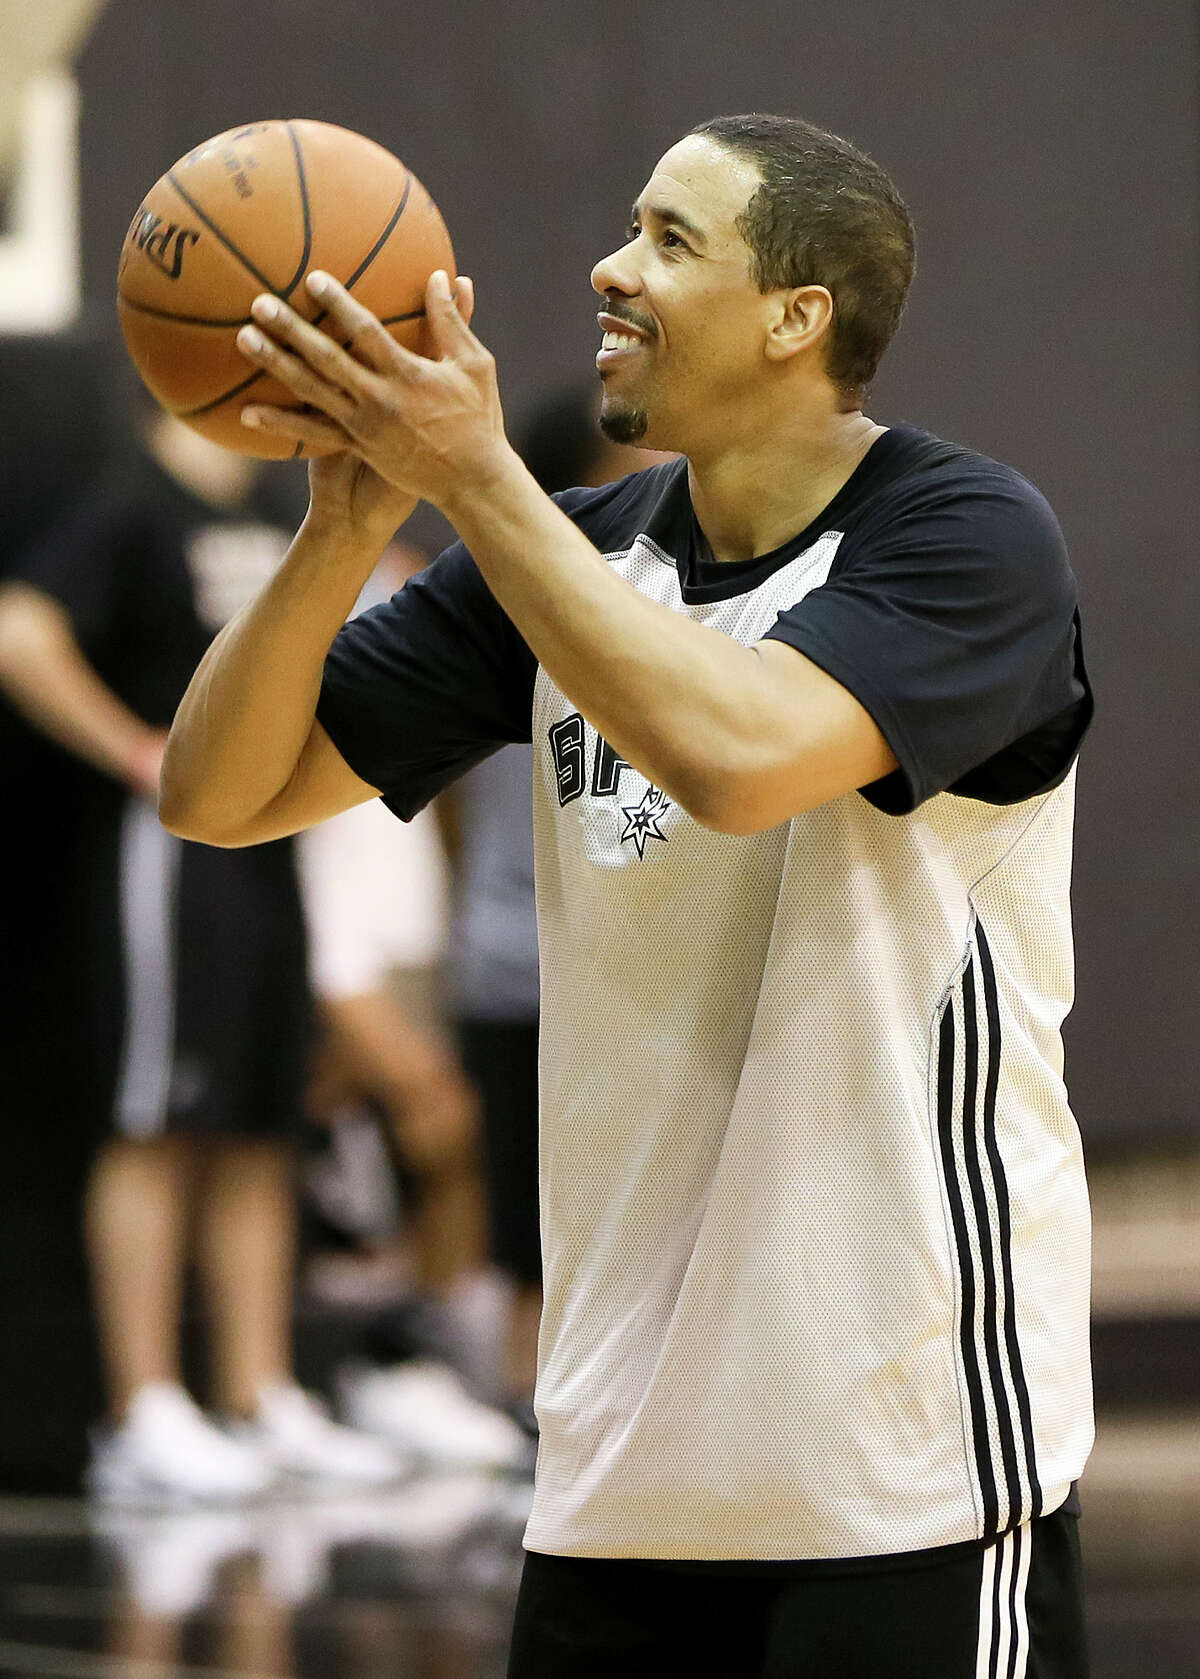 The newest Spurs roster addition, veteran guard Andre Miller, shoots free throws during his first workout at the Spurs practice facility on Tuesday, March 1, 2016.